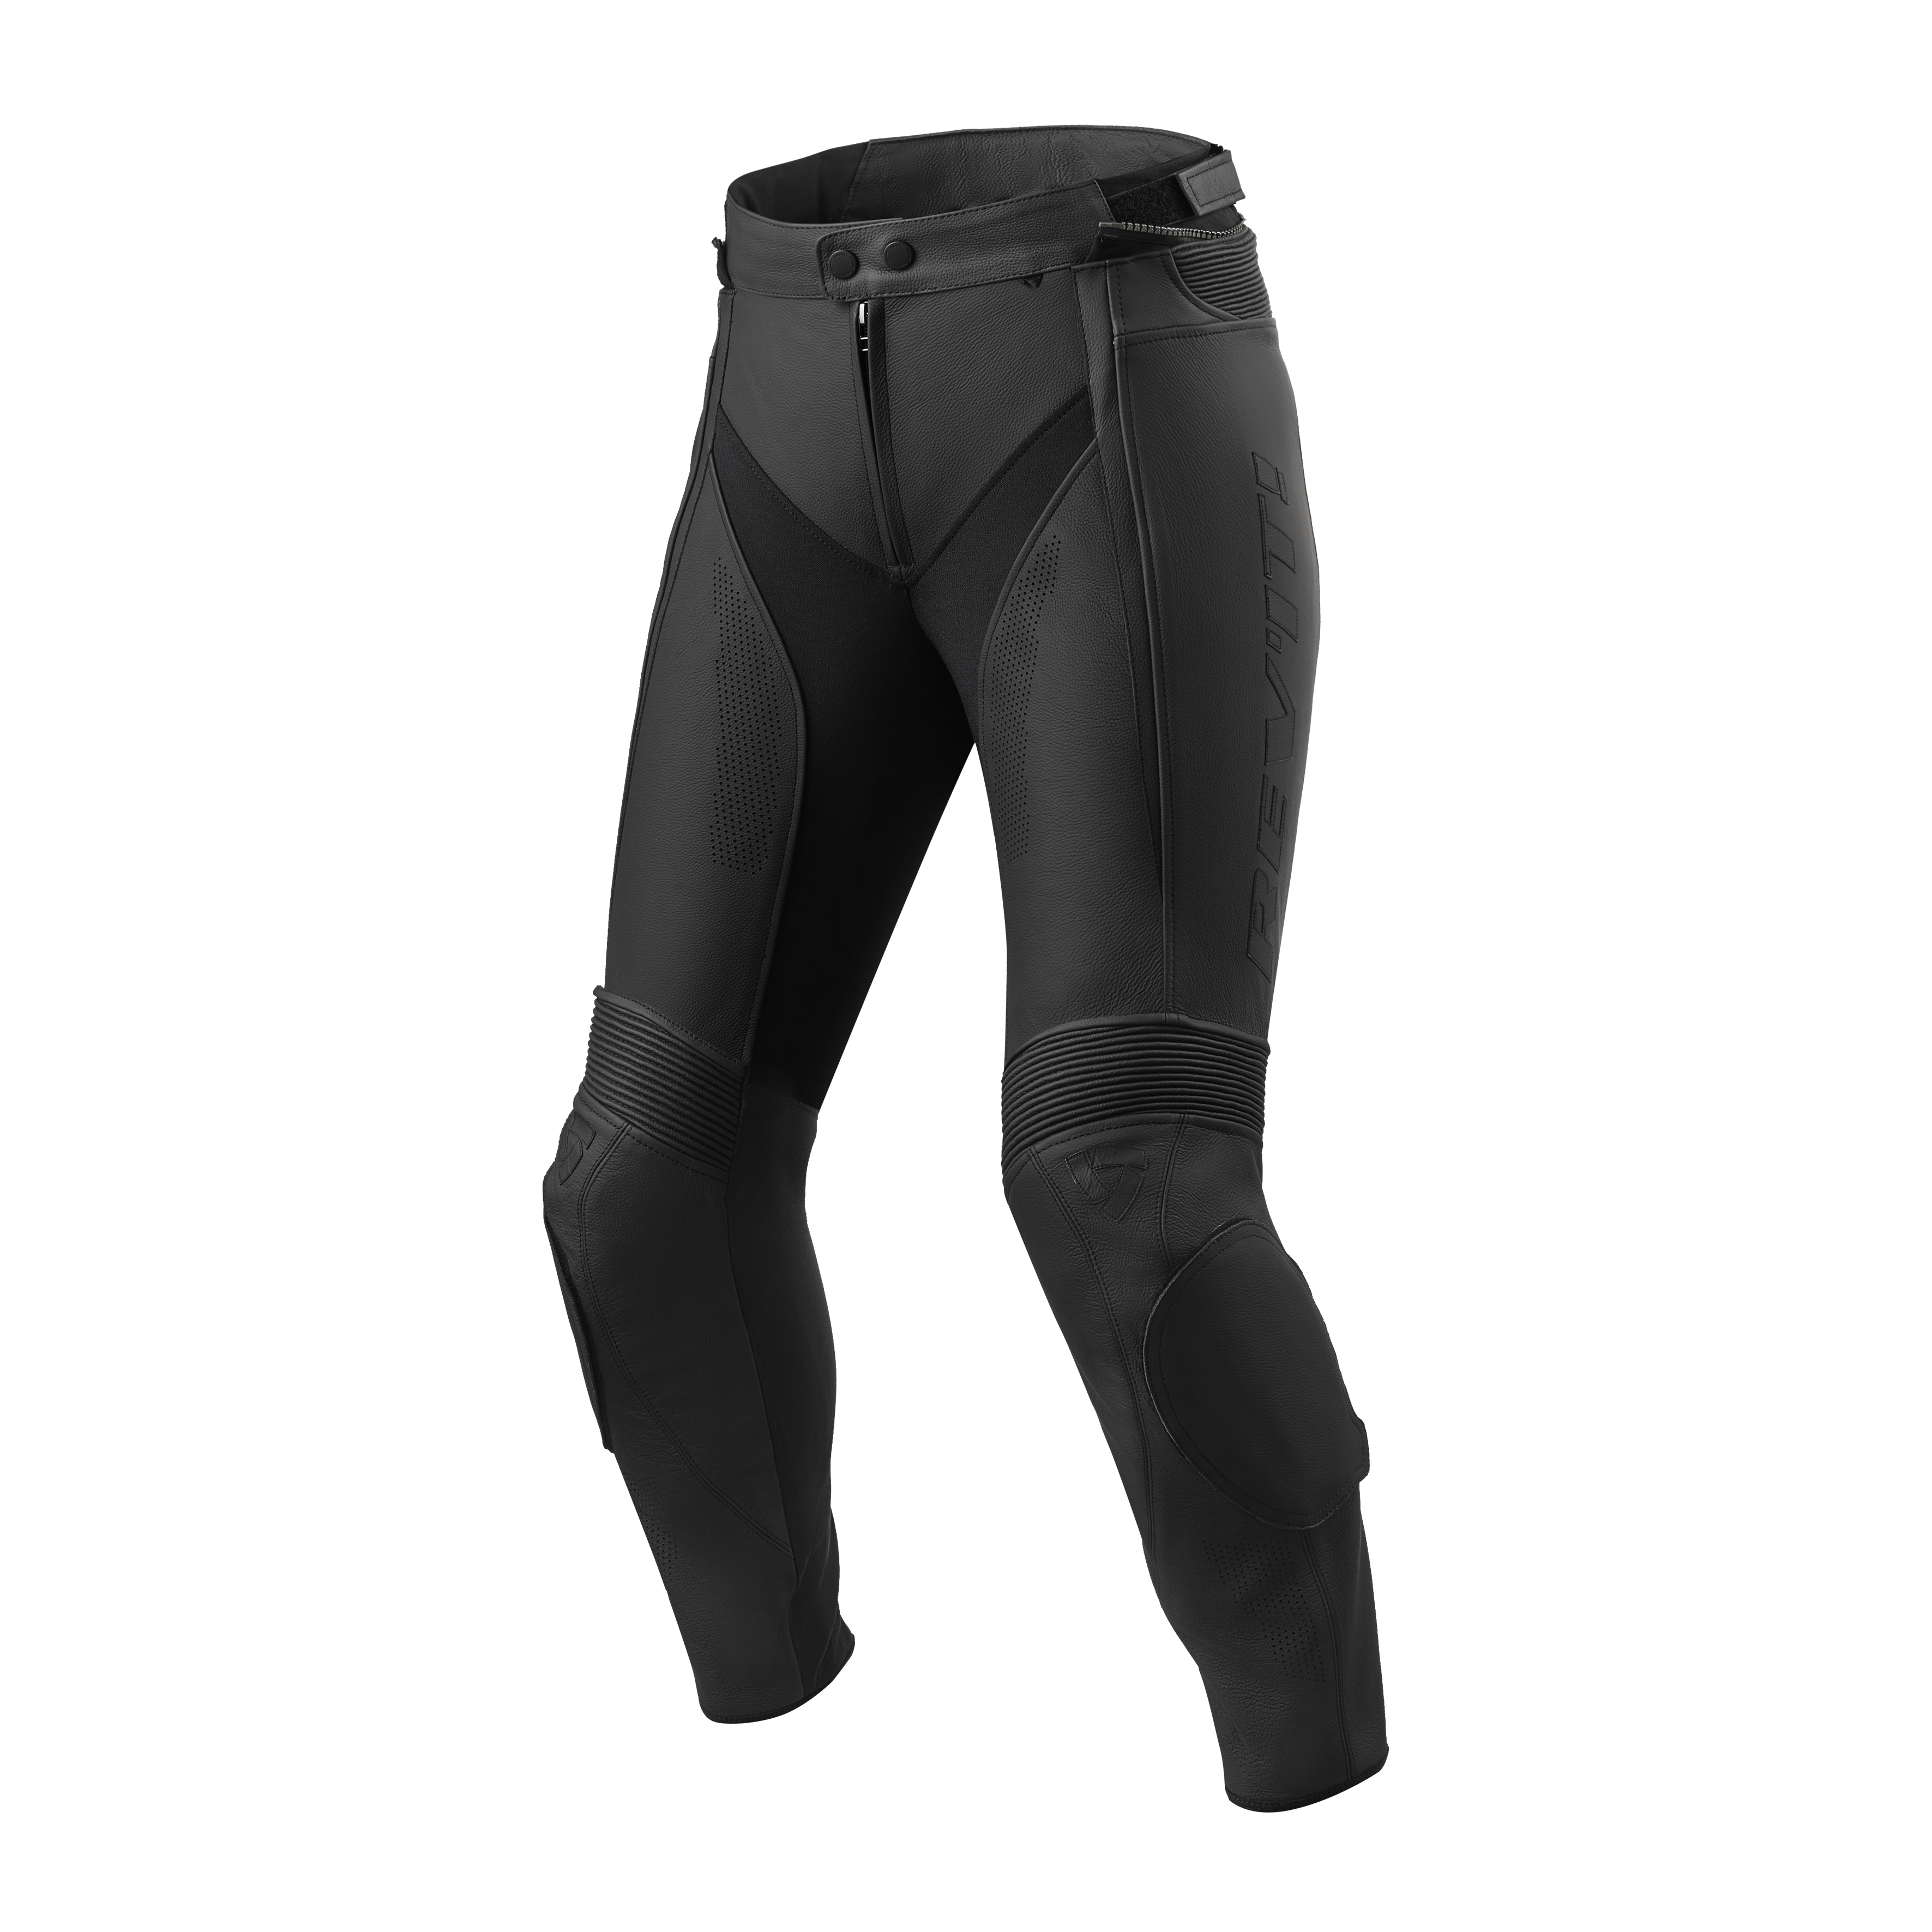 Viewing Images For REVIT Xena 3 Pants For Women :: MotorcycleGear.com